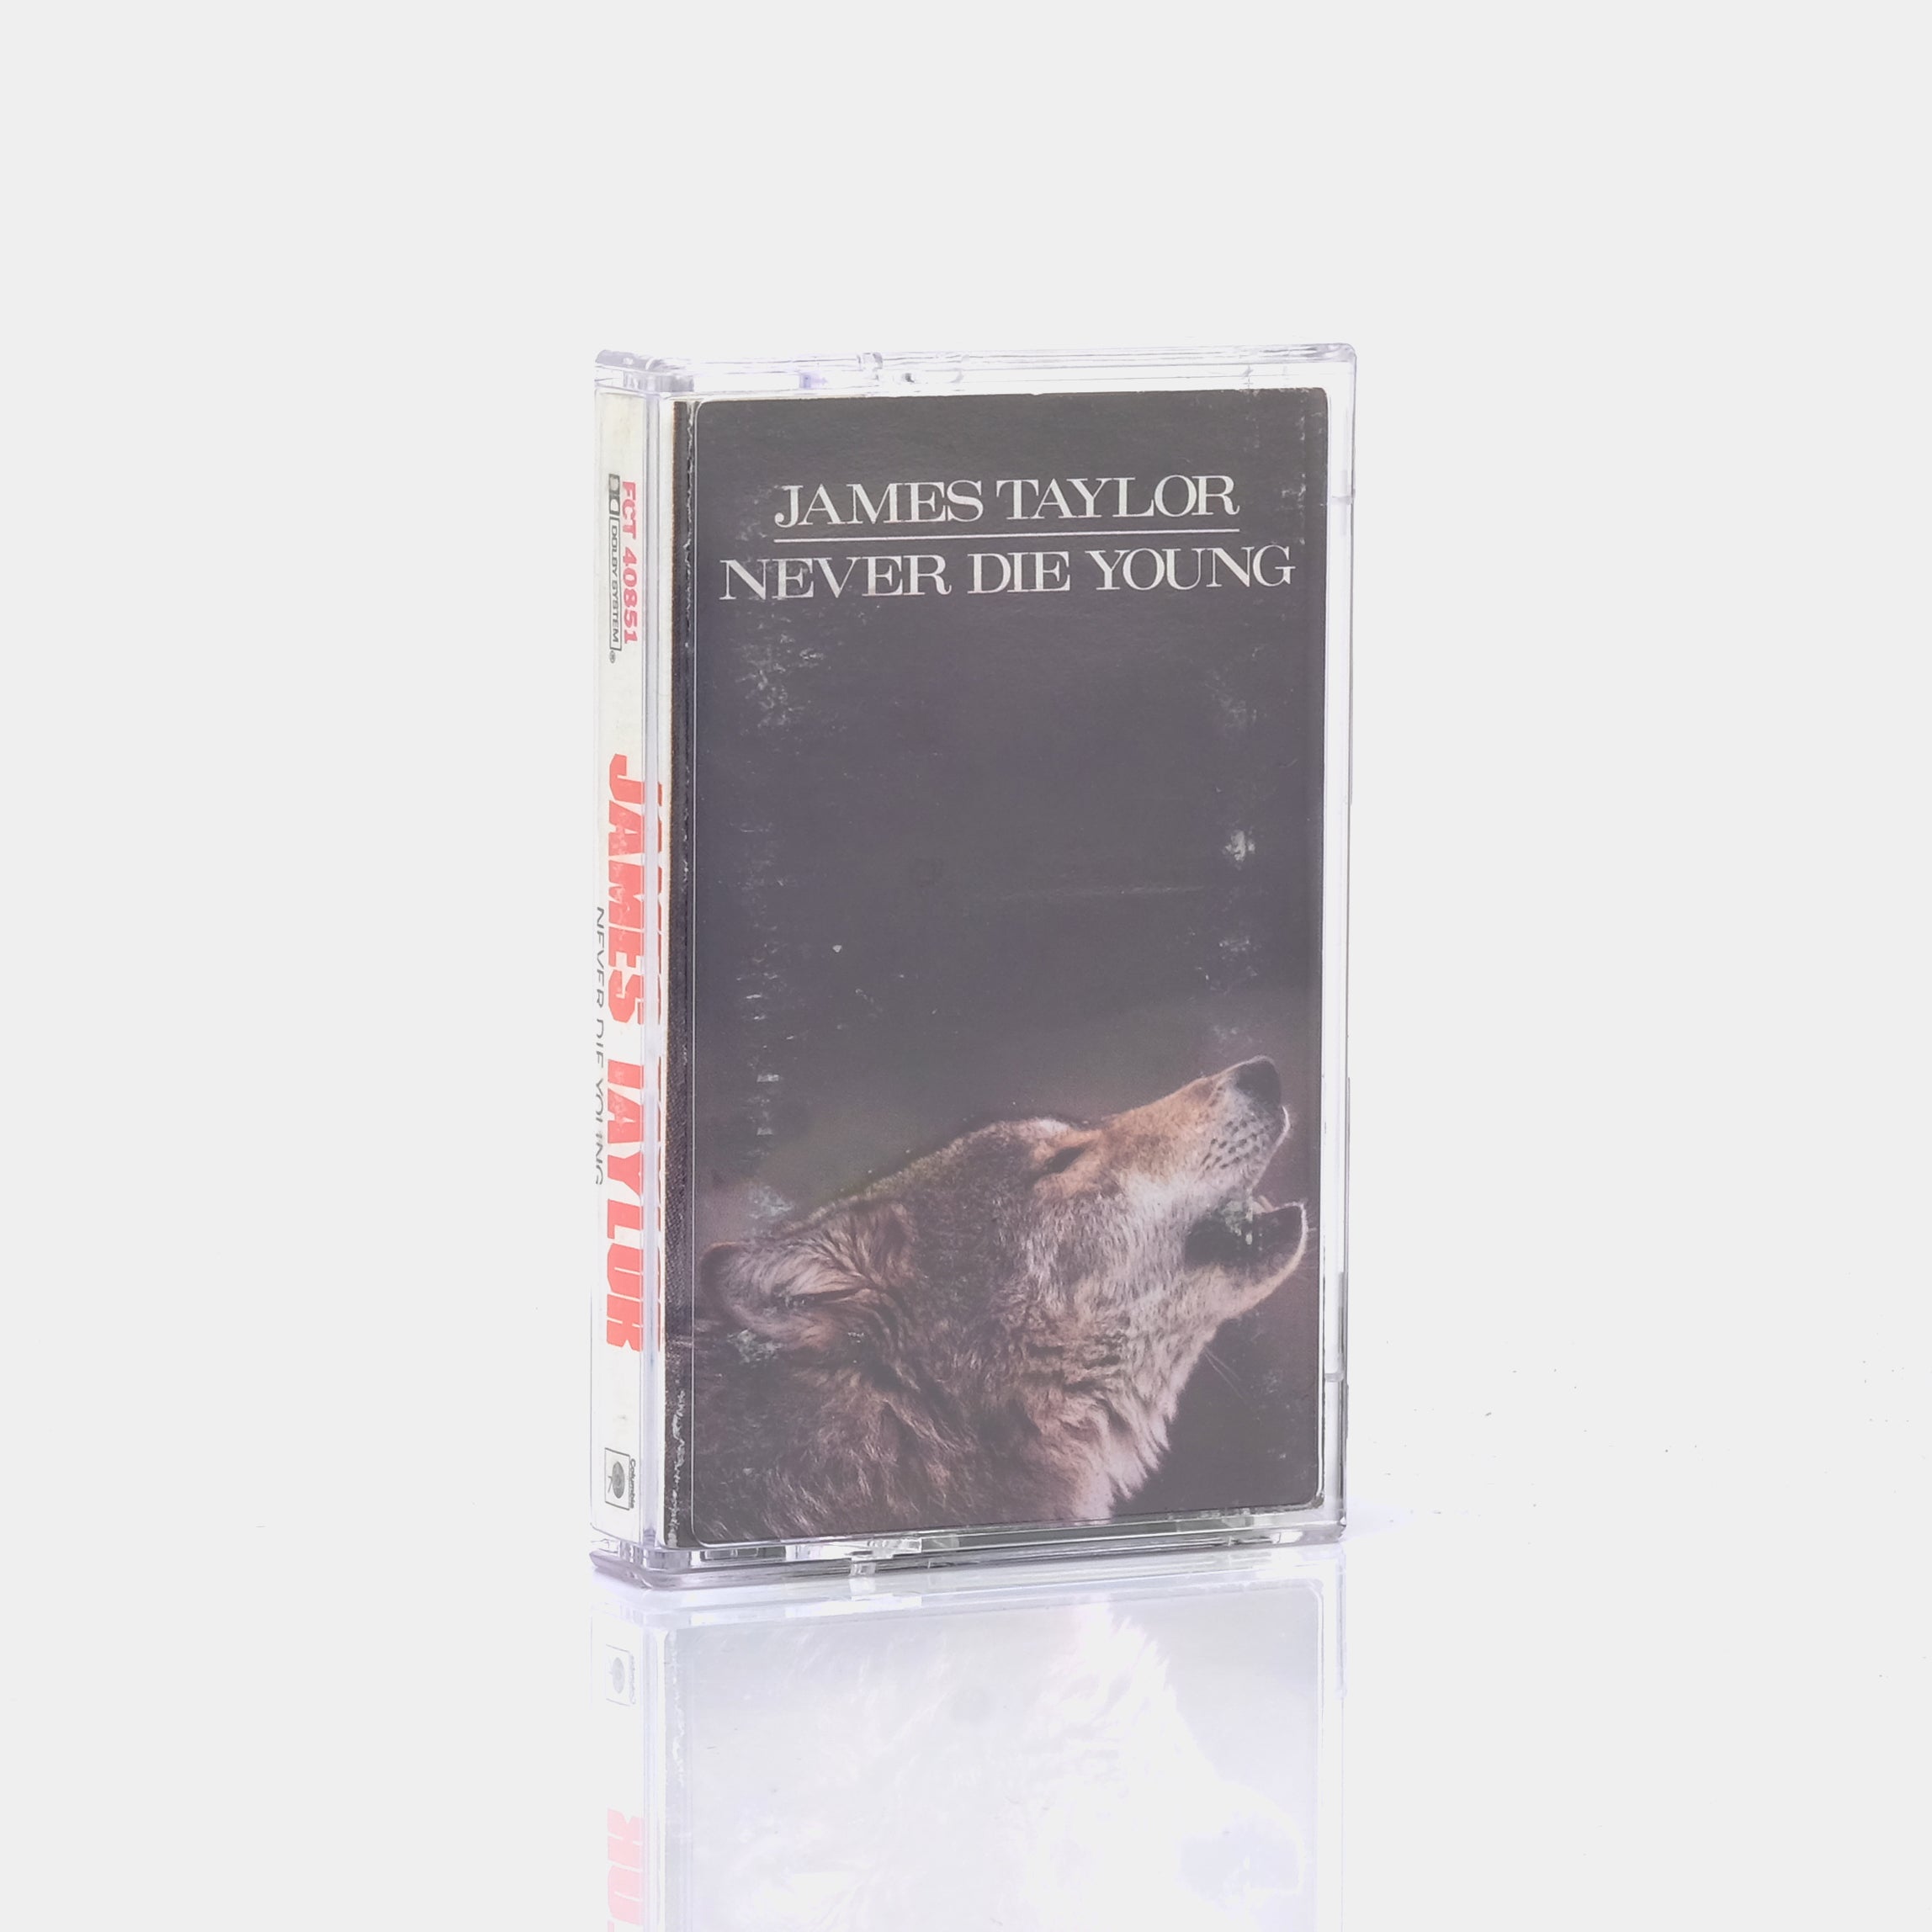 James Taylor - Never Die Young Cassette Tape